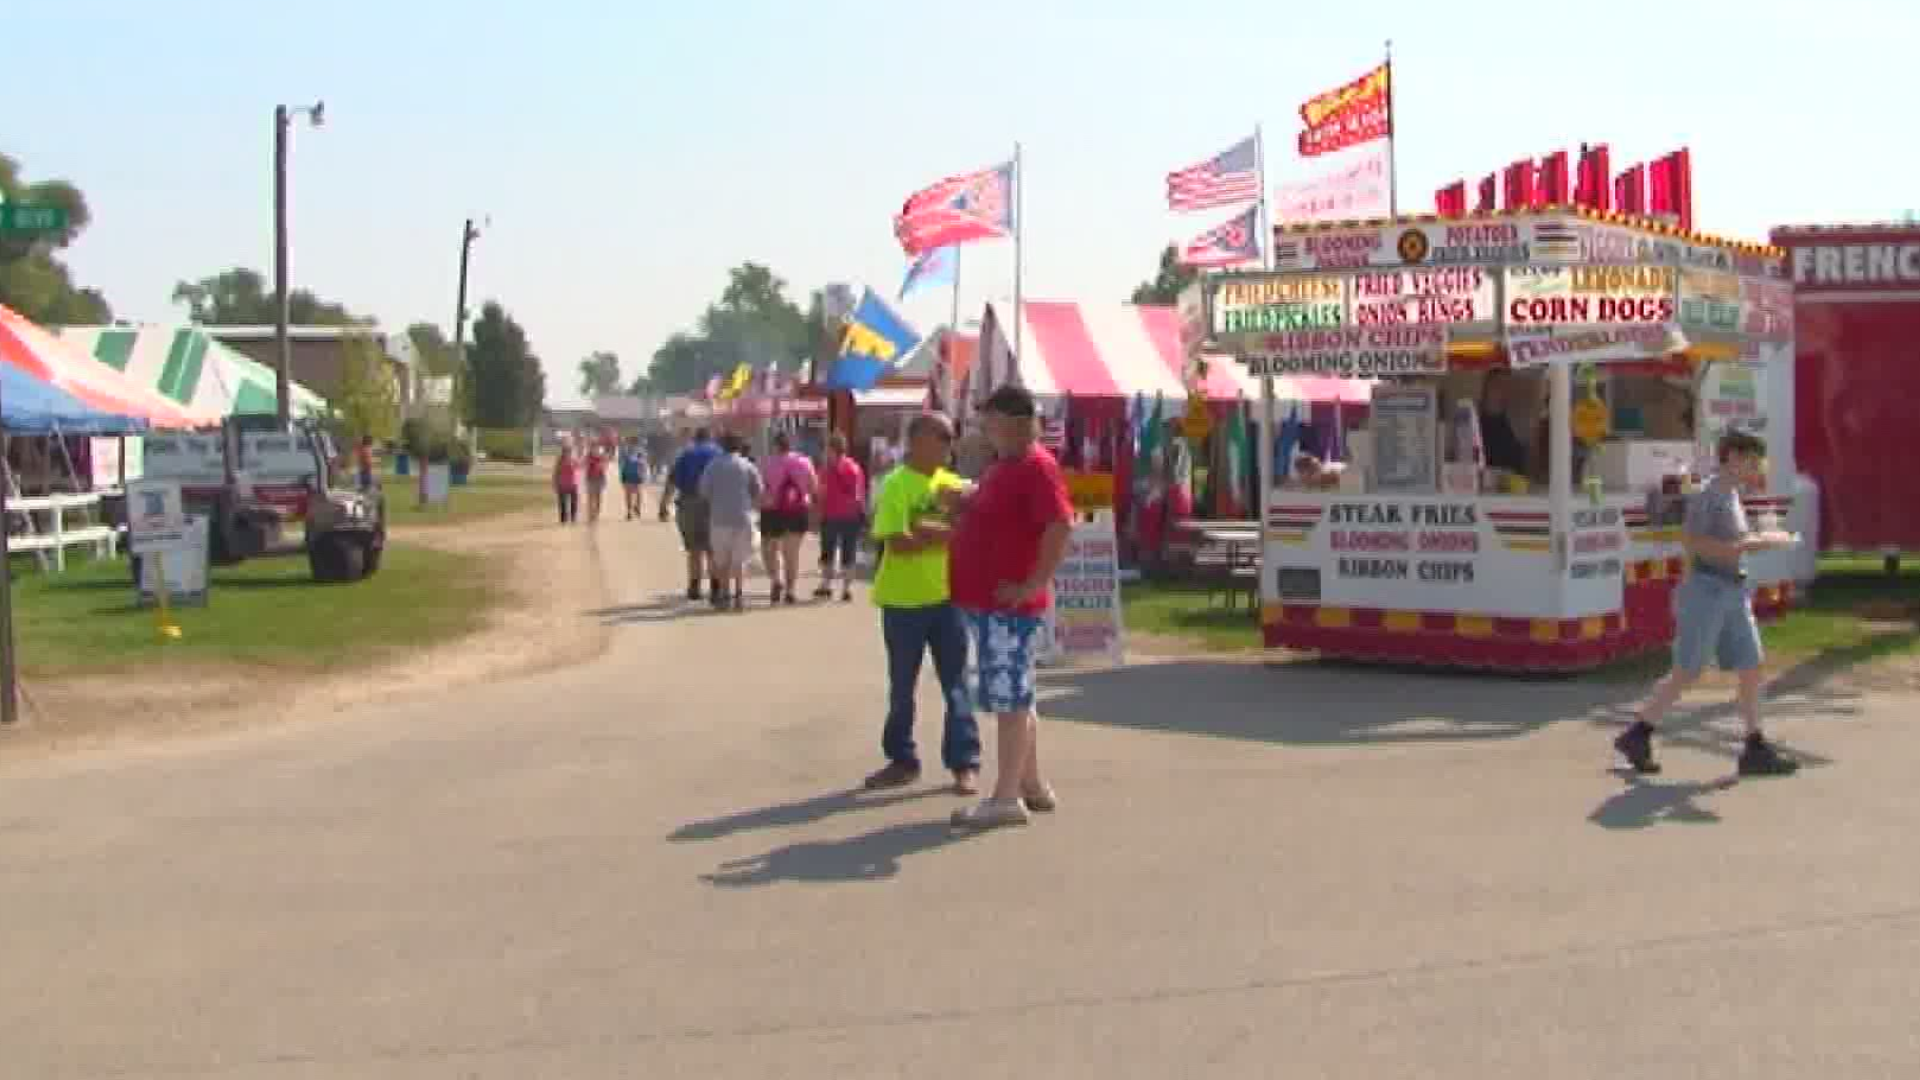 Is the Hancock County Fair still happening during the pandemic